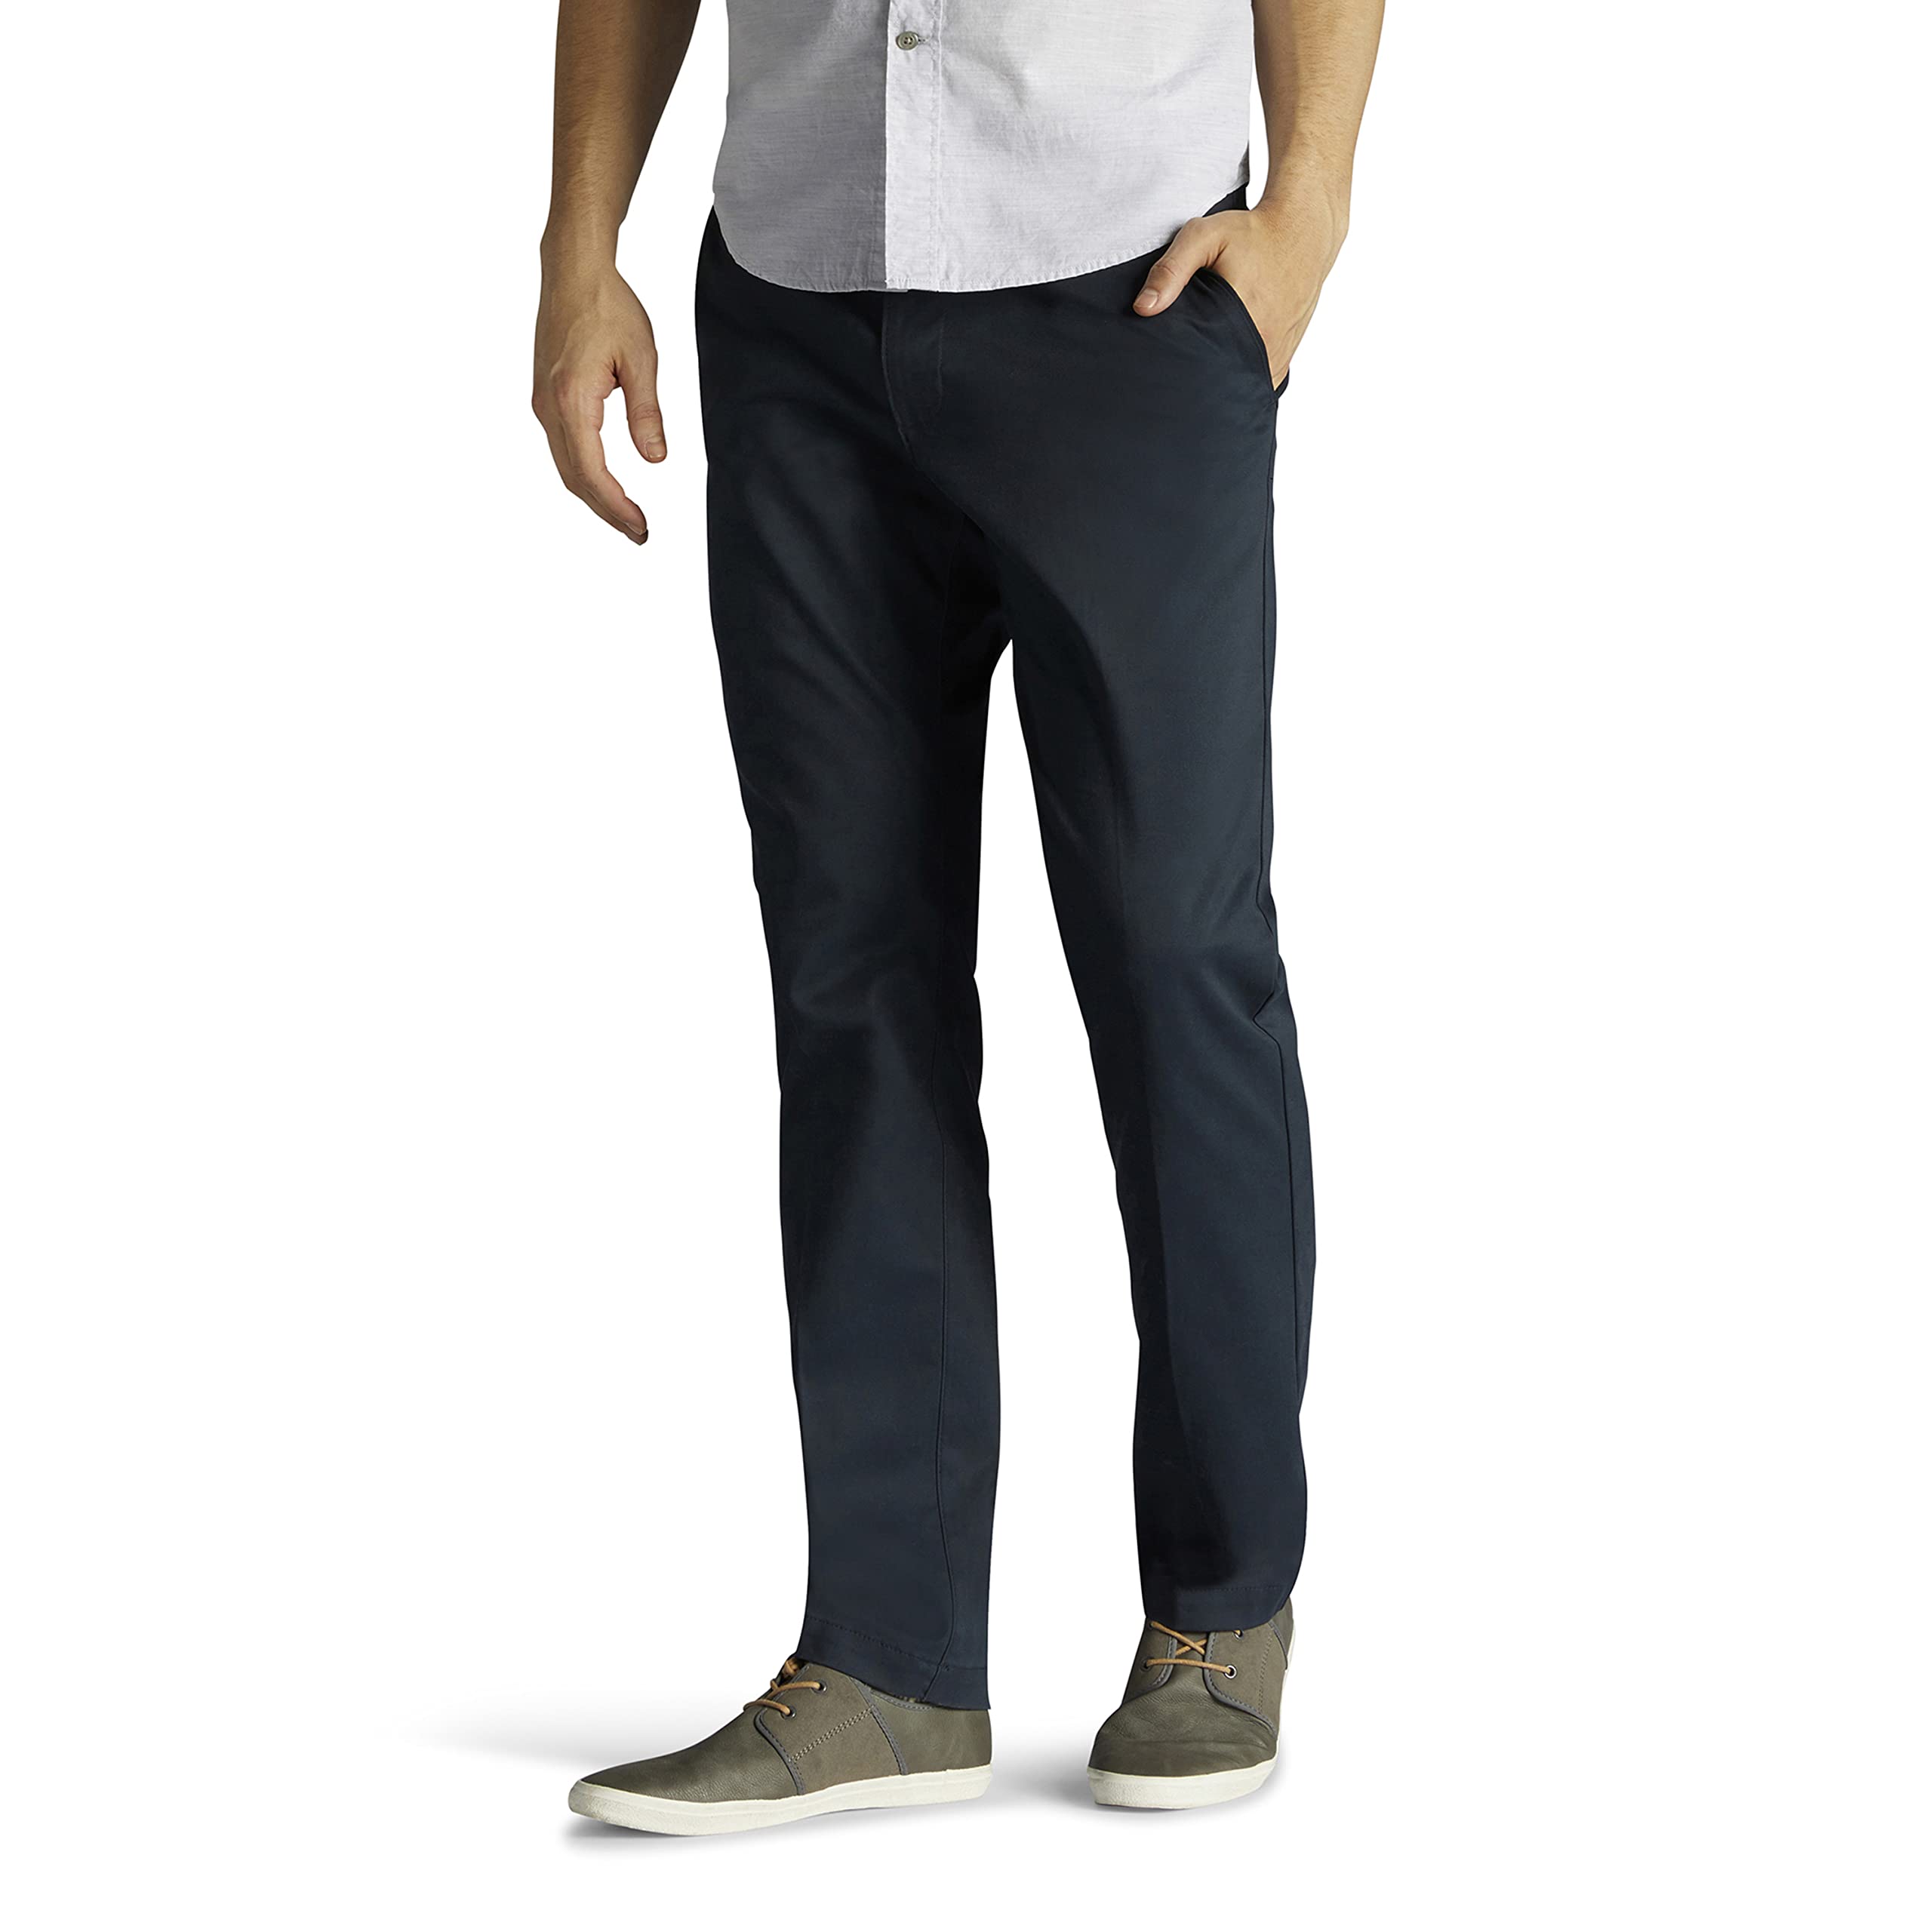 Lee Men's Extreme Motion Flat Front Slim Straight Pants (Navy or Painter Gray, Various Sizes) + Free Shipping w/ Prime or on $35+ $17